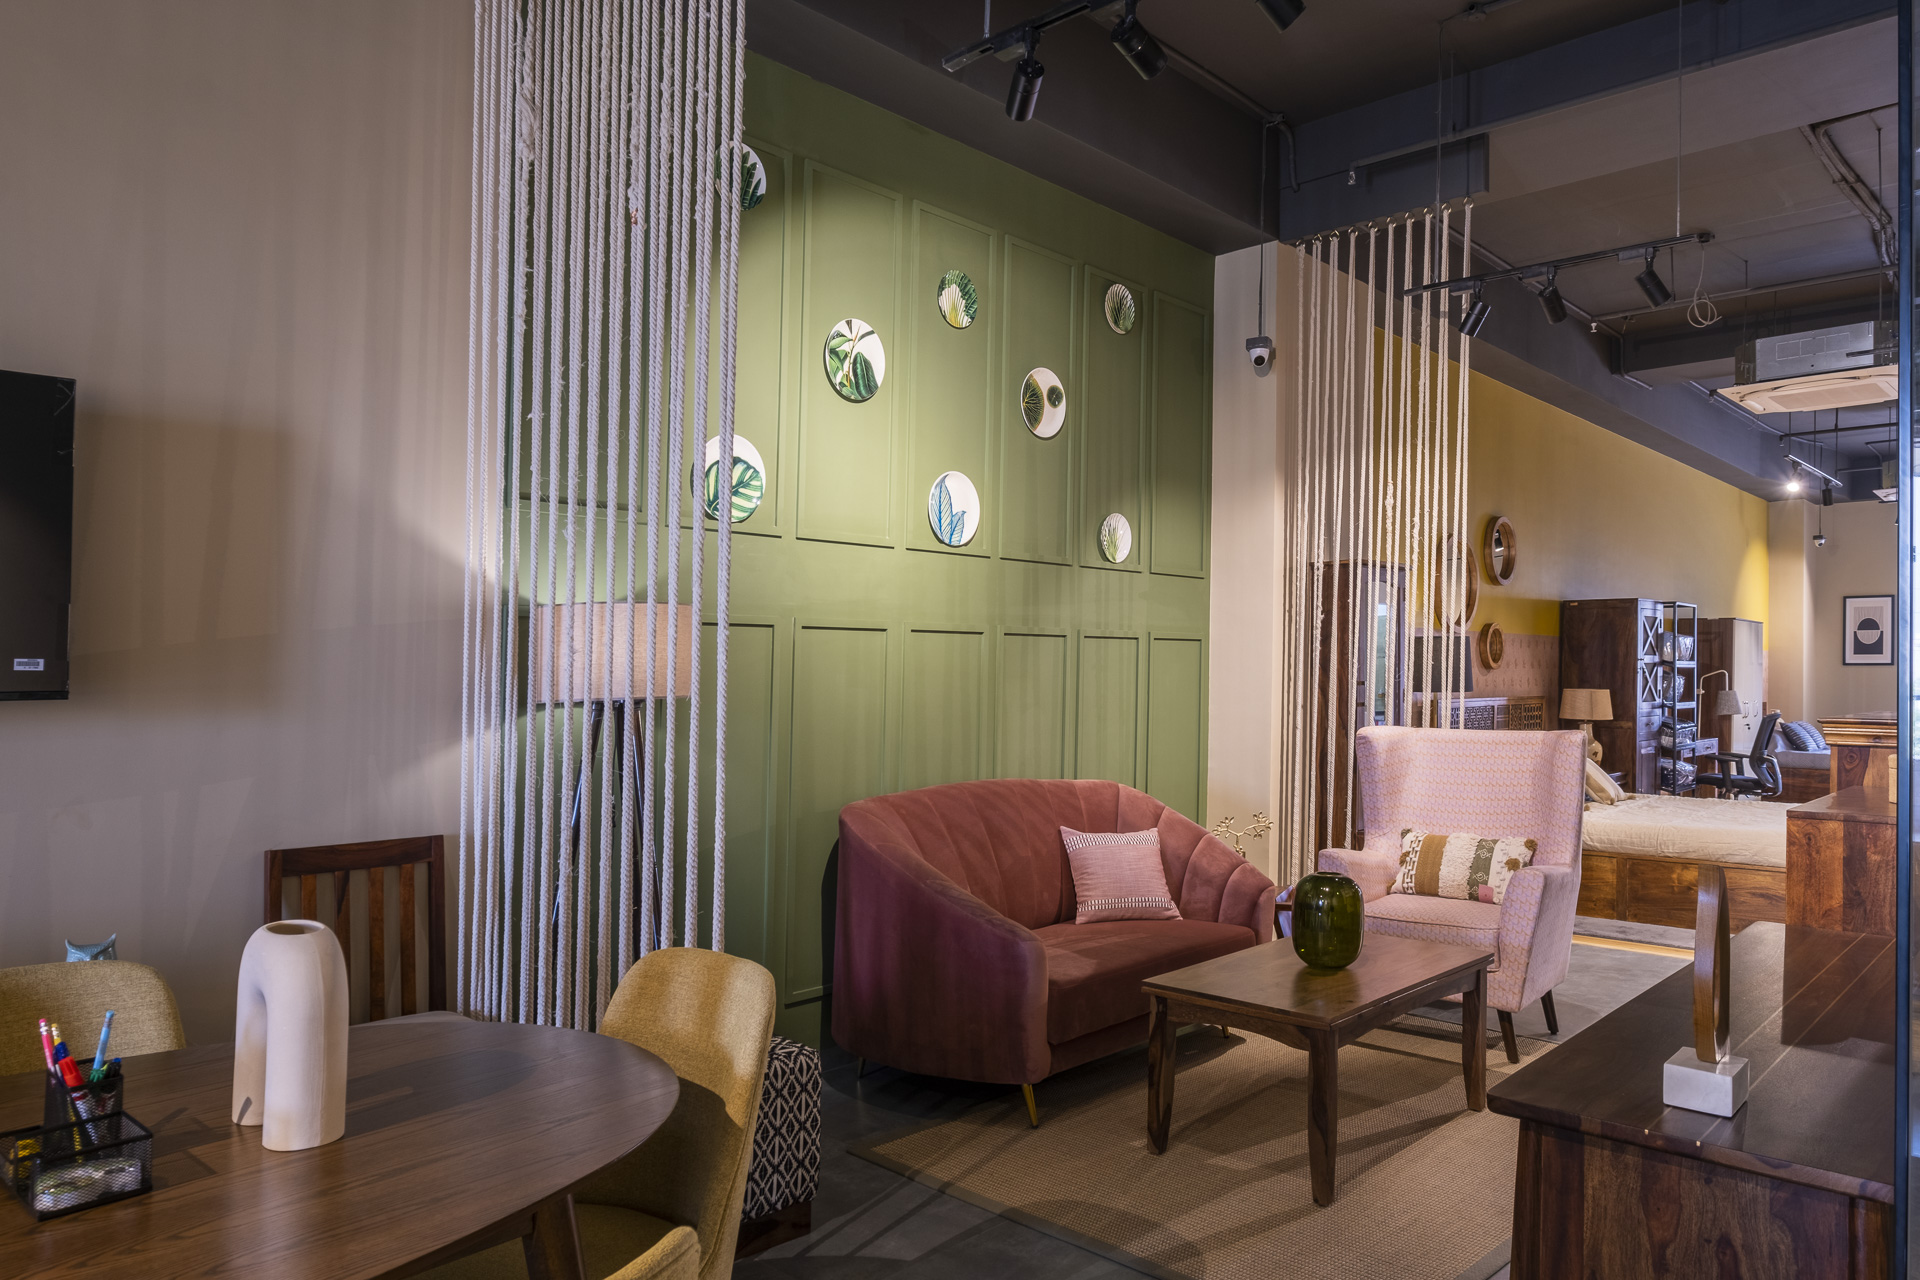 Furniture and home goods company Pepperfry opened a studio in Ahmedabad